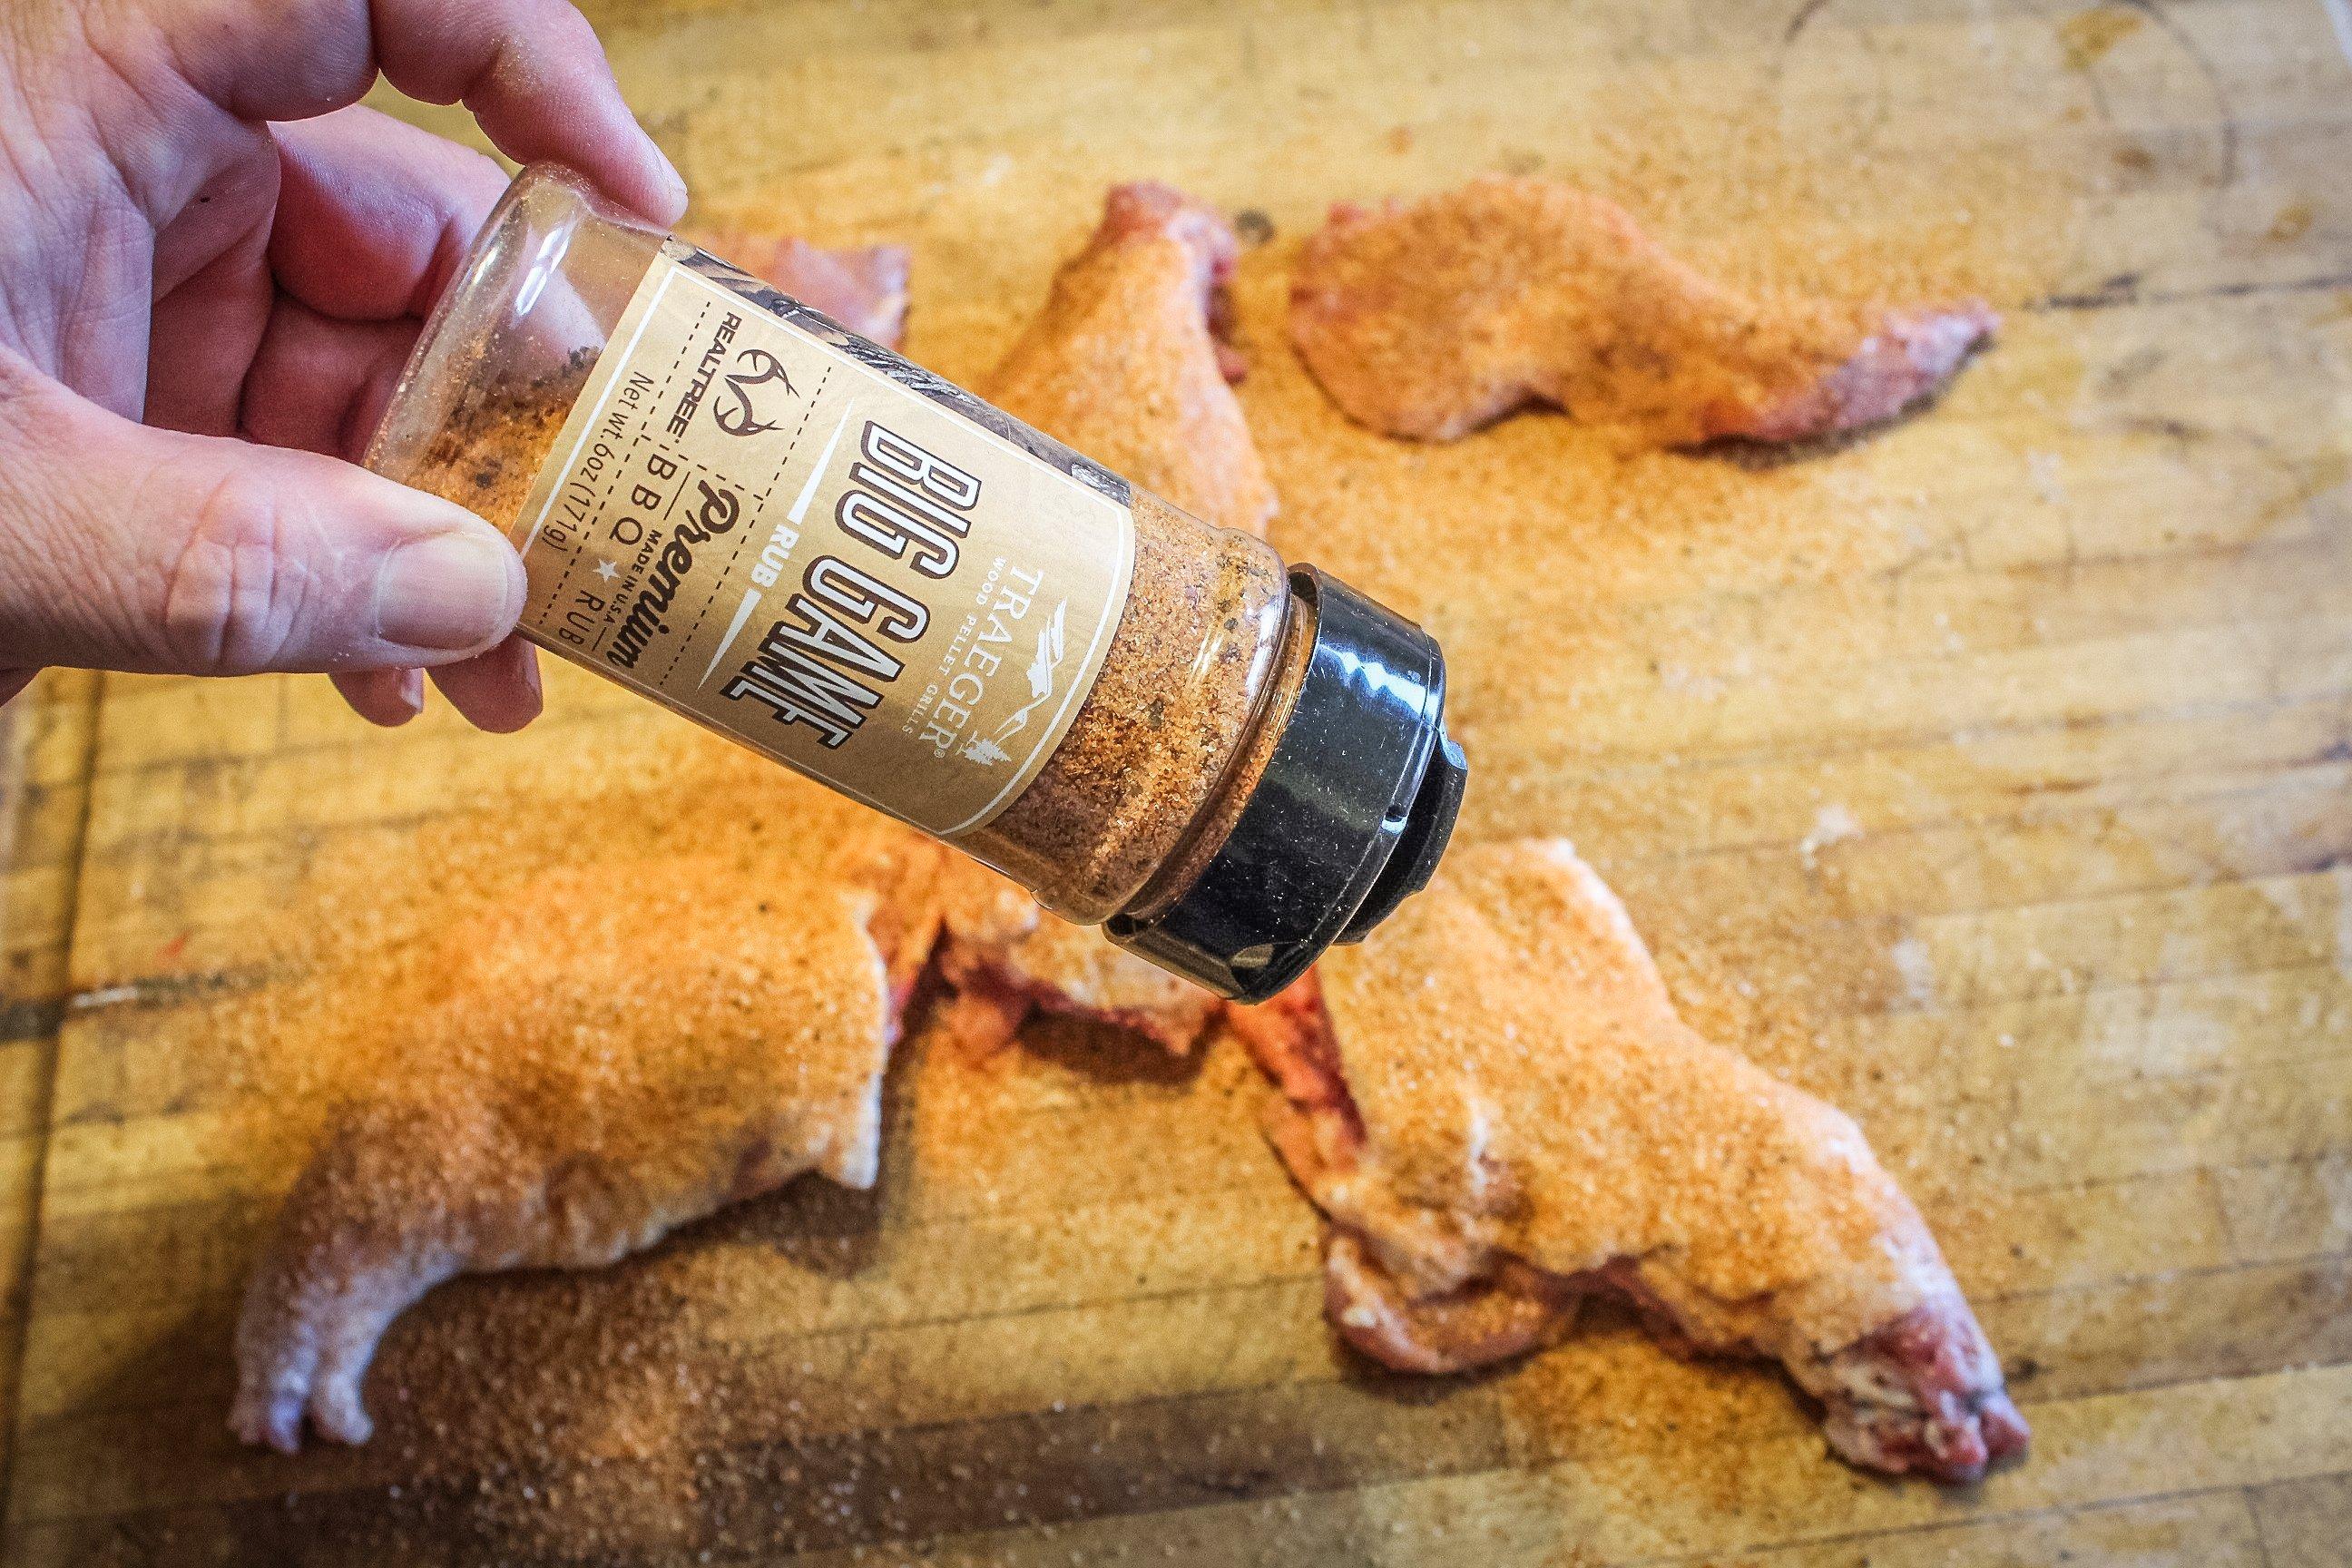 Sprinkle your favorite BBQ rub over the surface of the meat.